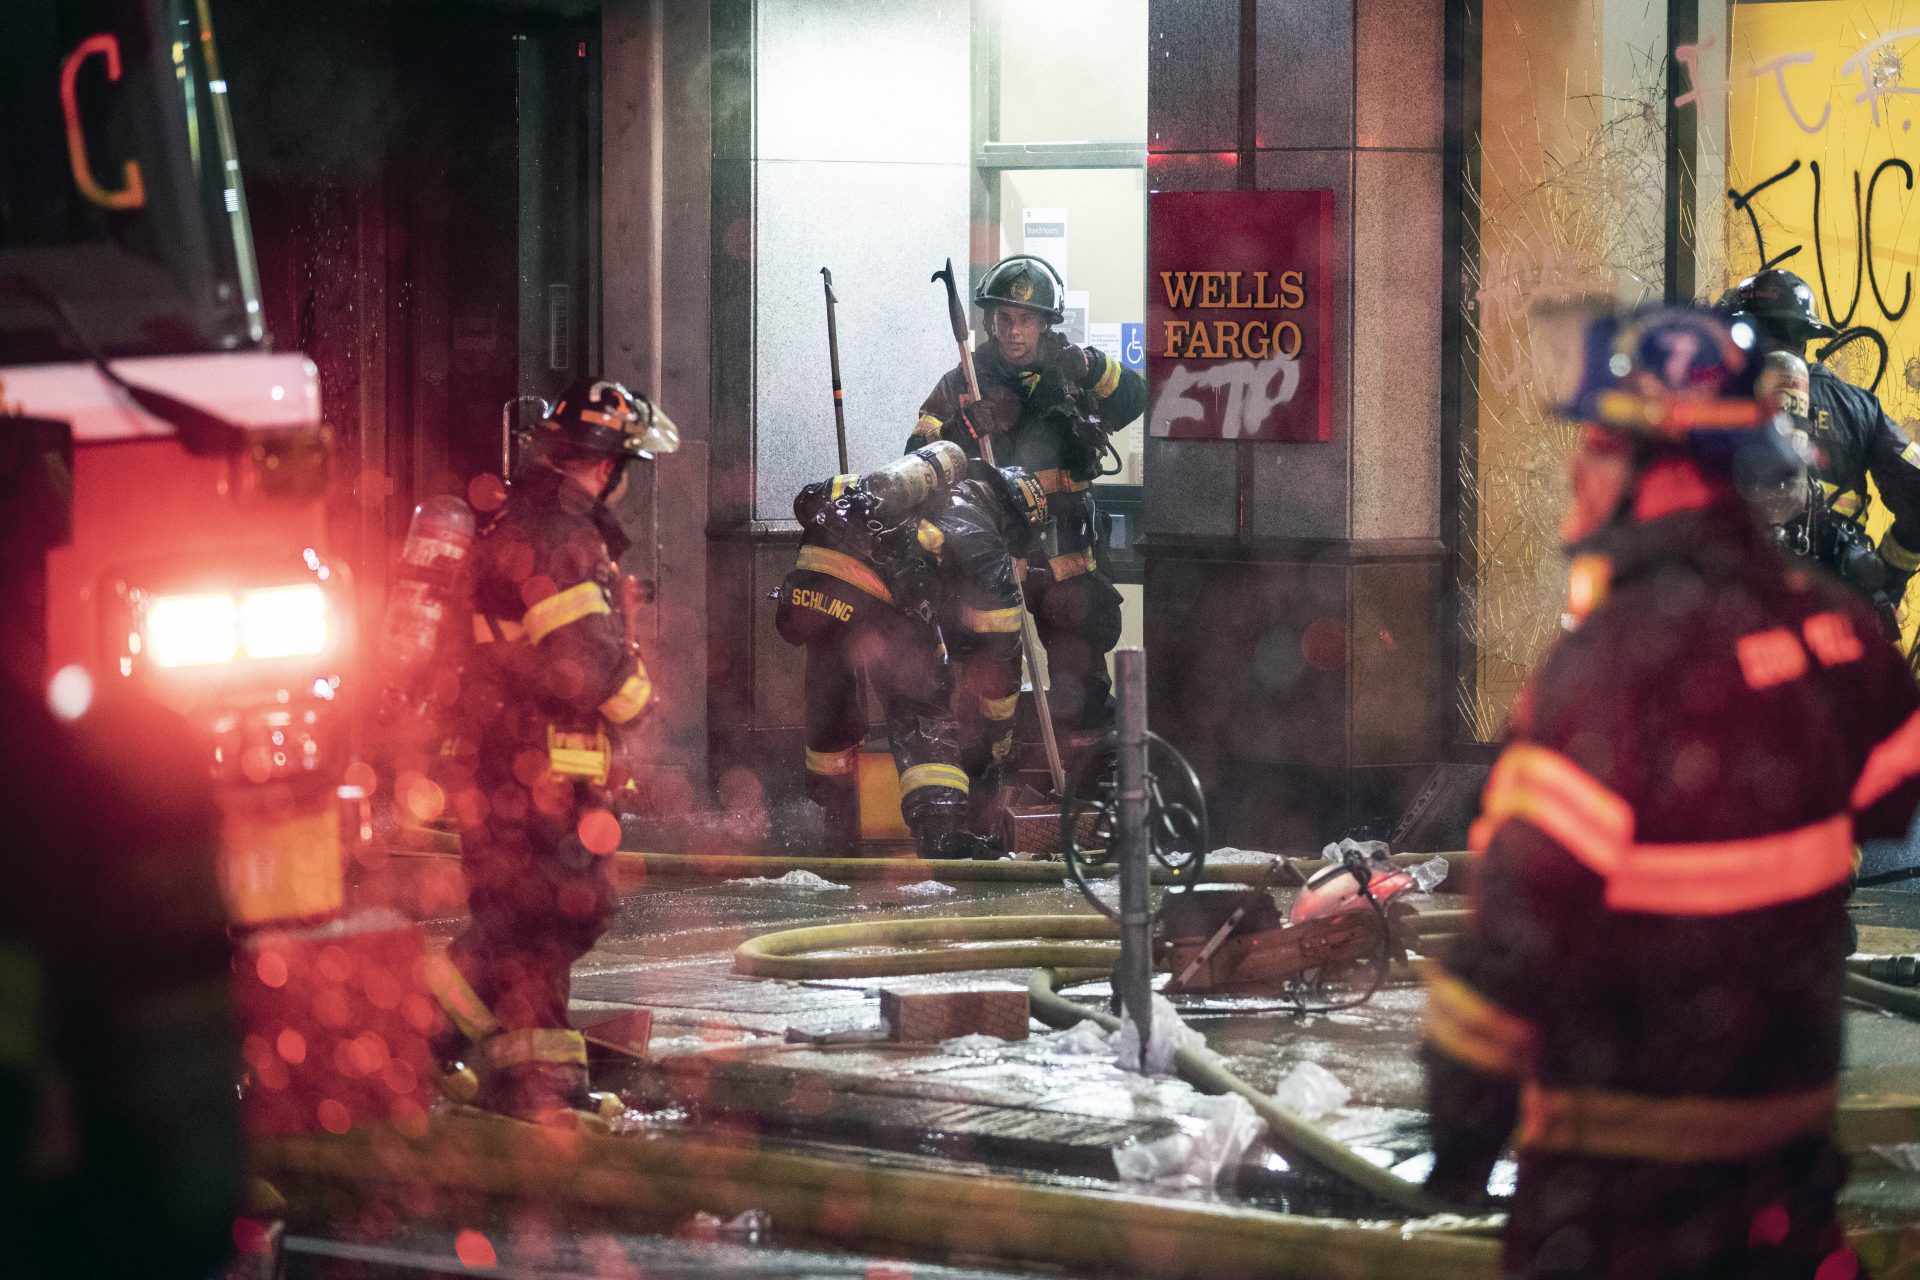 Firefighters battle a blaze during the Justice for George Floyd Philadelphia Protest on Saturday, May 30, 2020. Protests were held throughout the country over the death of Floyd, a black man who died after being restrained by Minneapolis police officers on May 25.